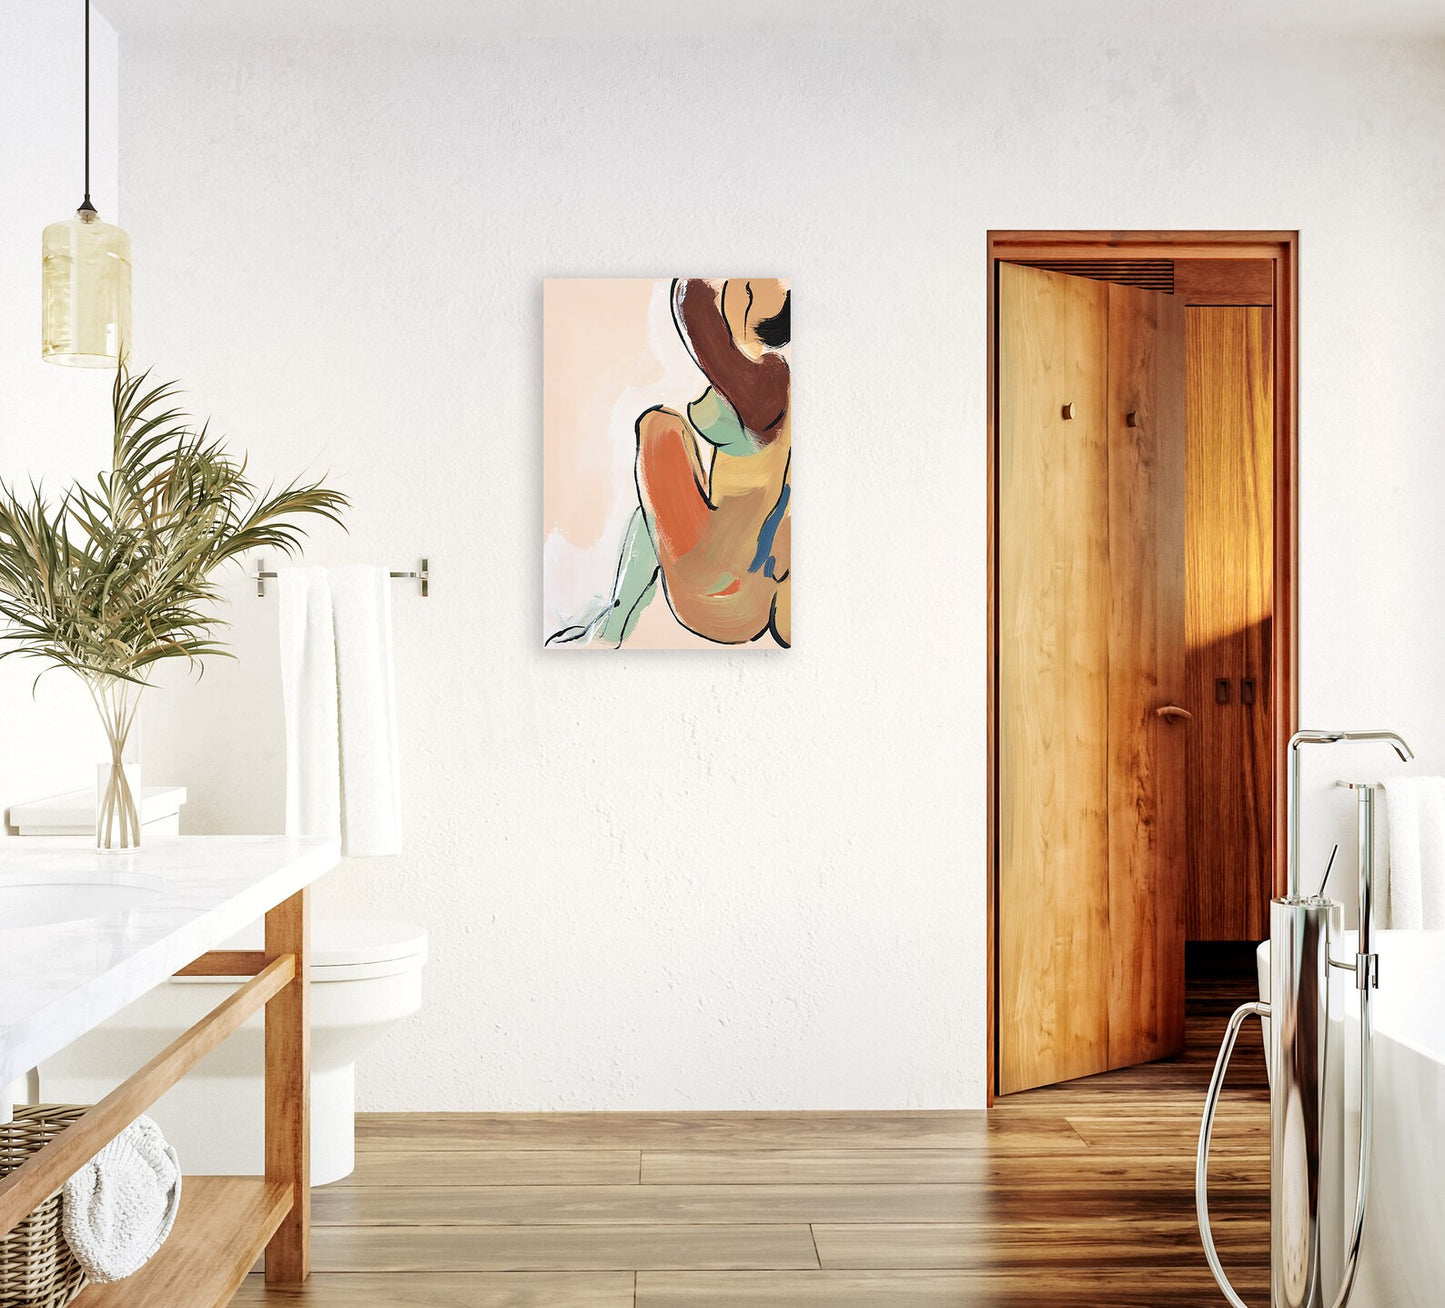 Hand-painted Art "Abstract woman nude" Modern Oil Painting, Wall art for living room, bedroom, office - Wrapped Canvas Painting